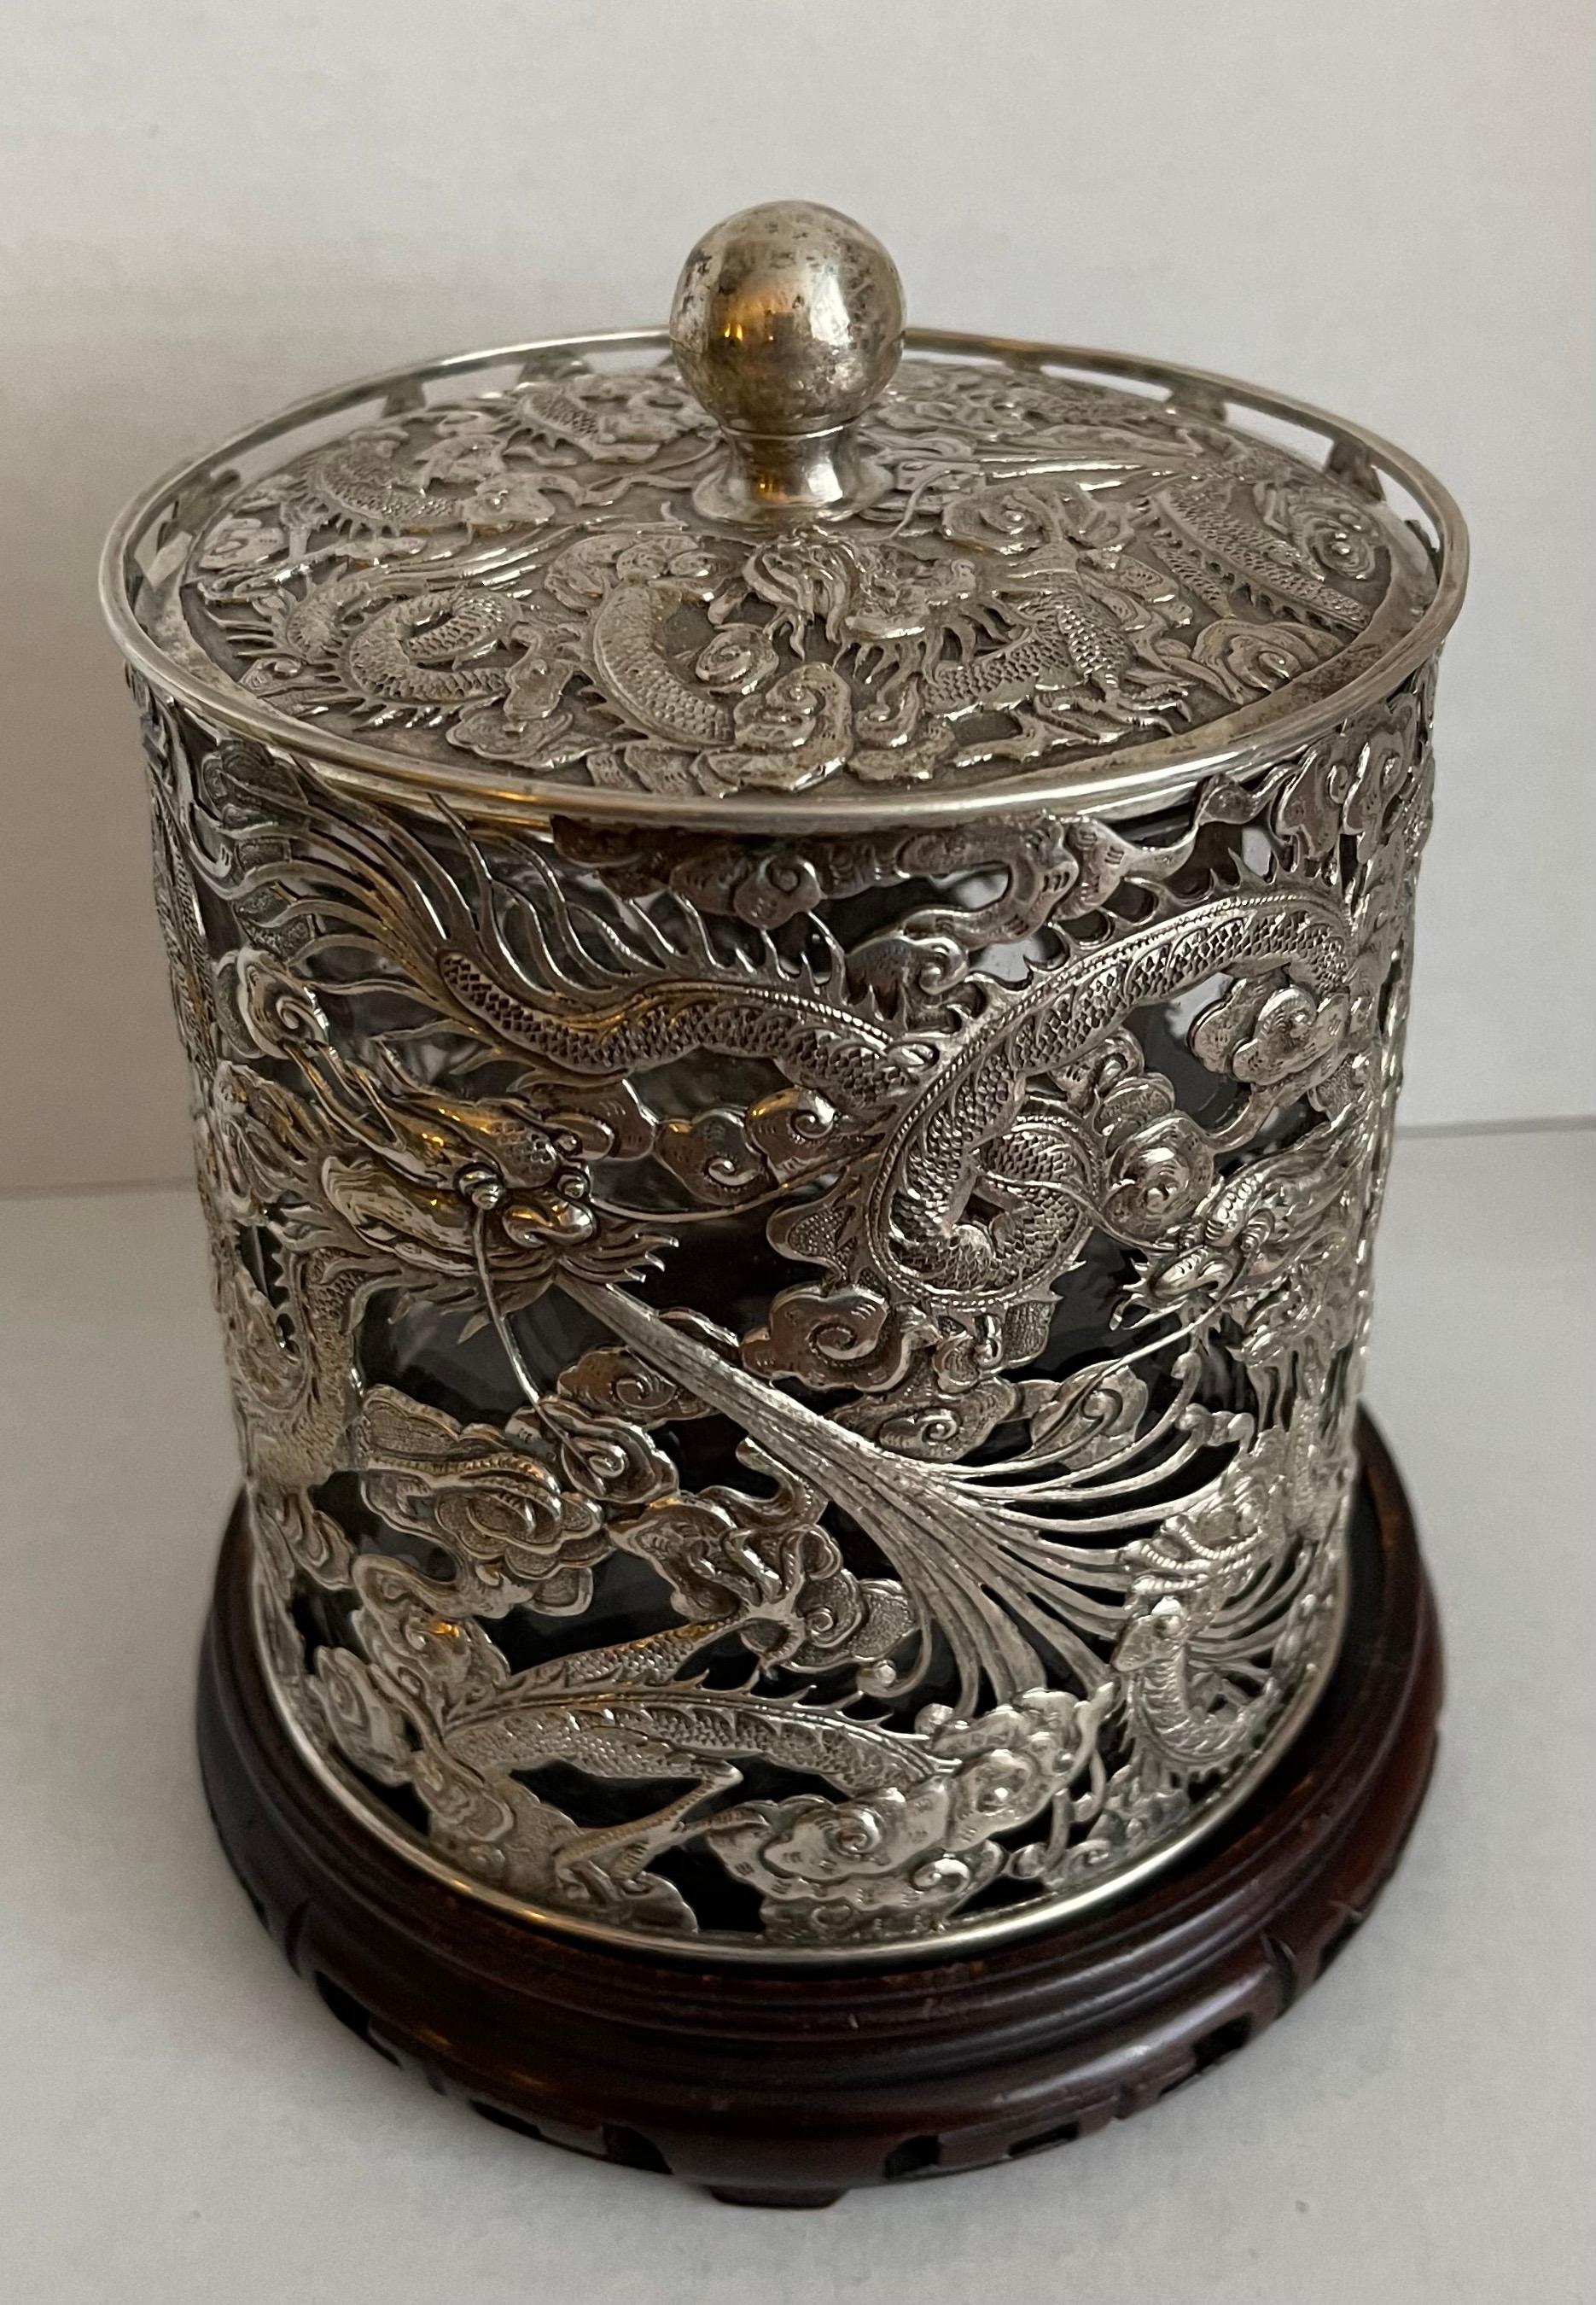 Unusual Chinese Export silver and glass humidor. 
Silver with repoussè and engraved dragon motif. clear glass liner is believed to be original. Illegible 
makers mark on the inside of the lid, as shown in photos.